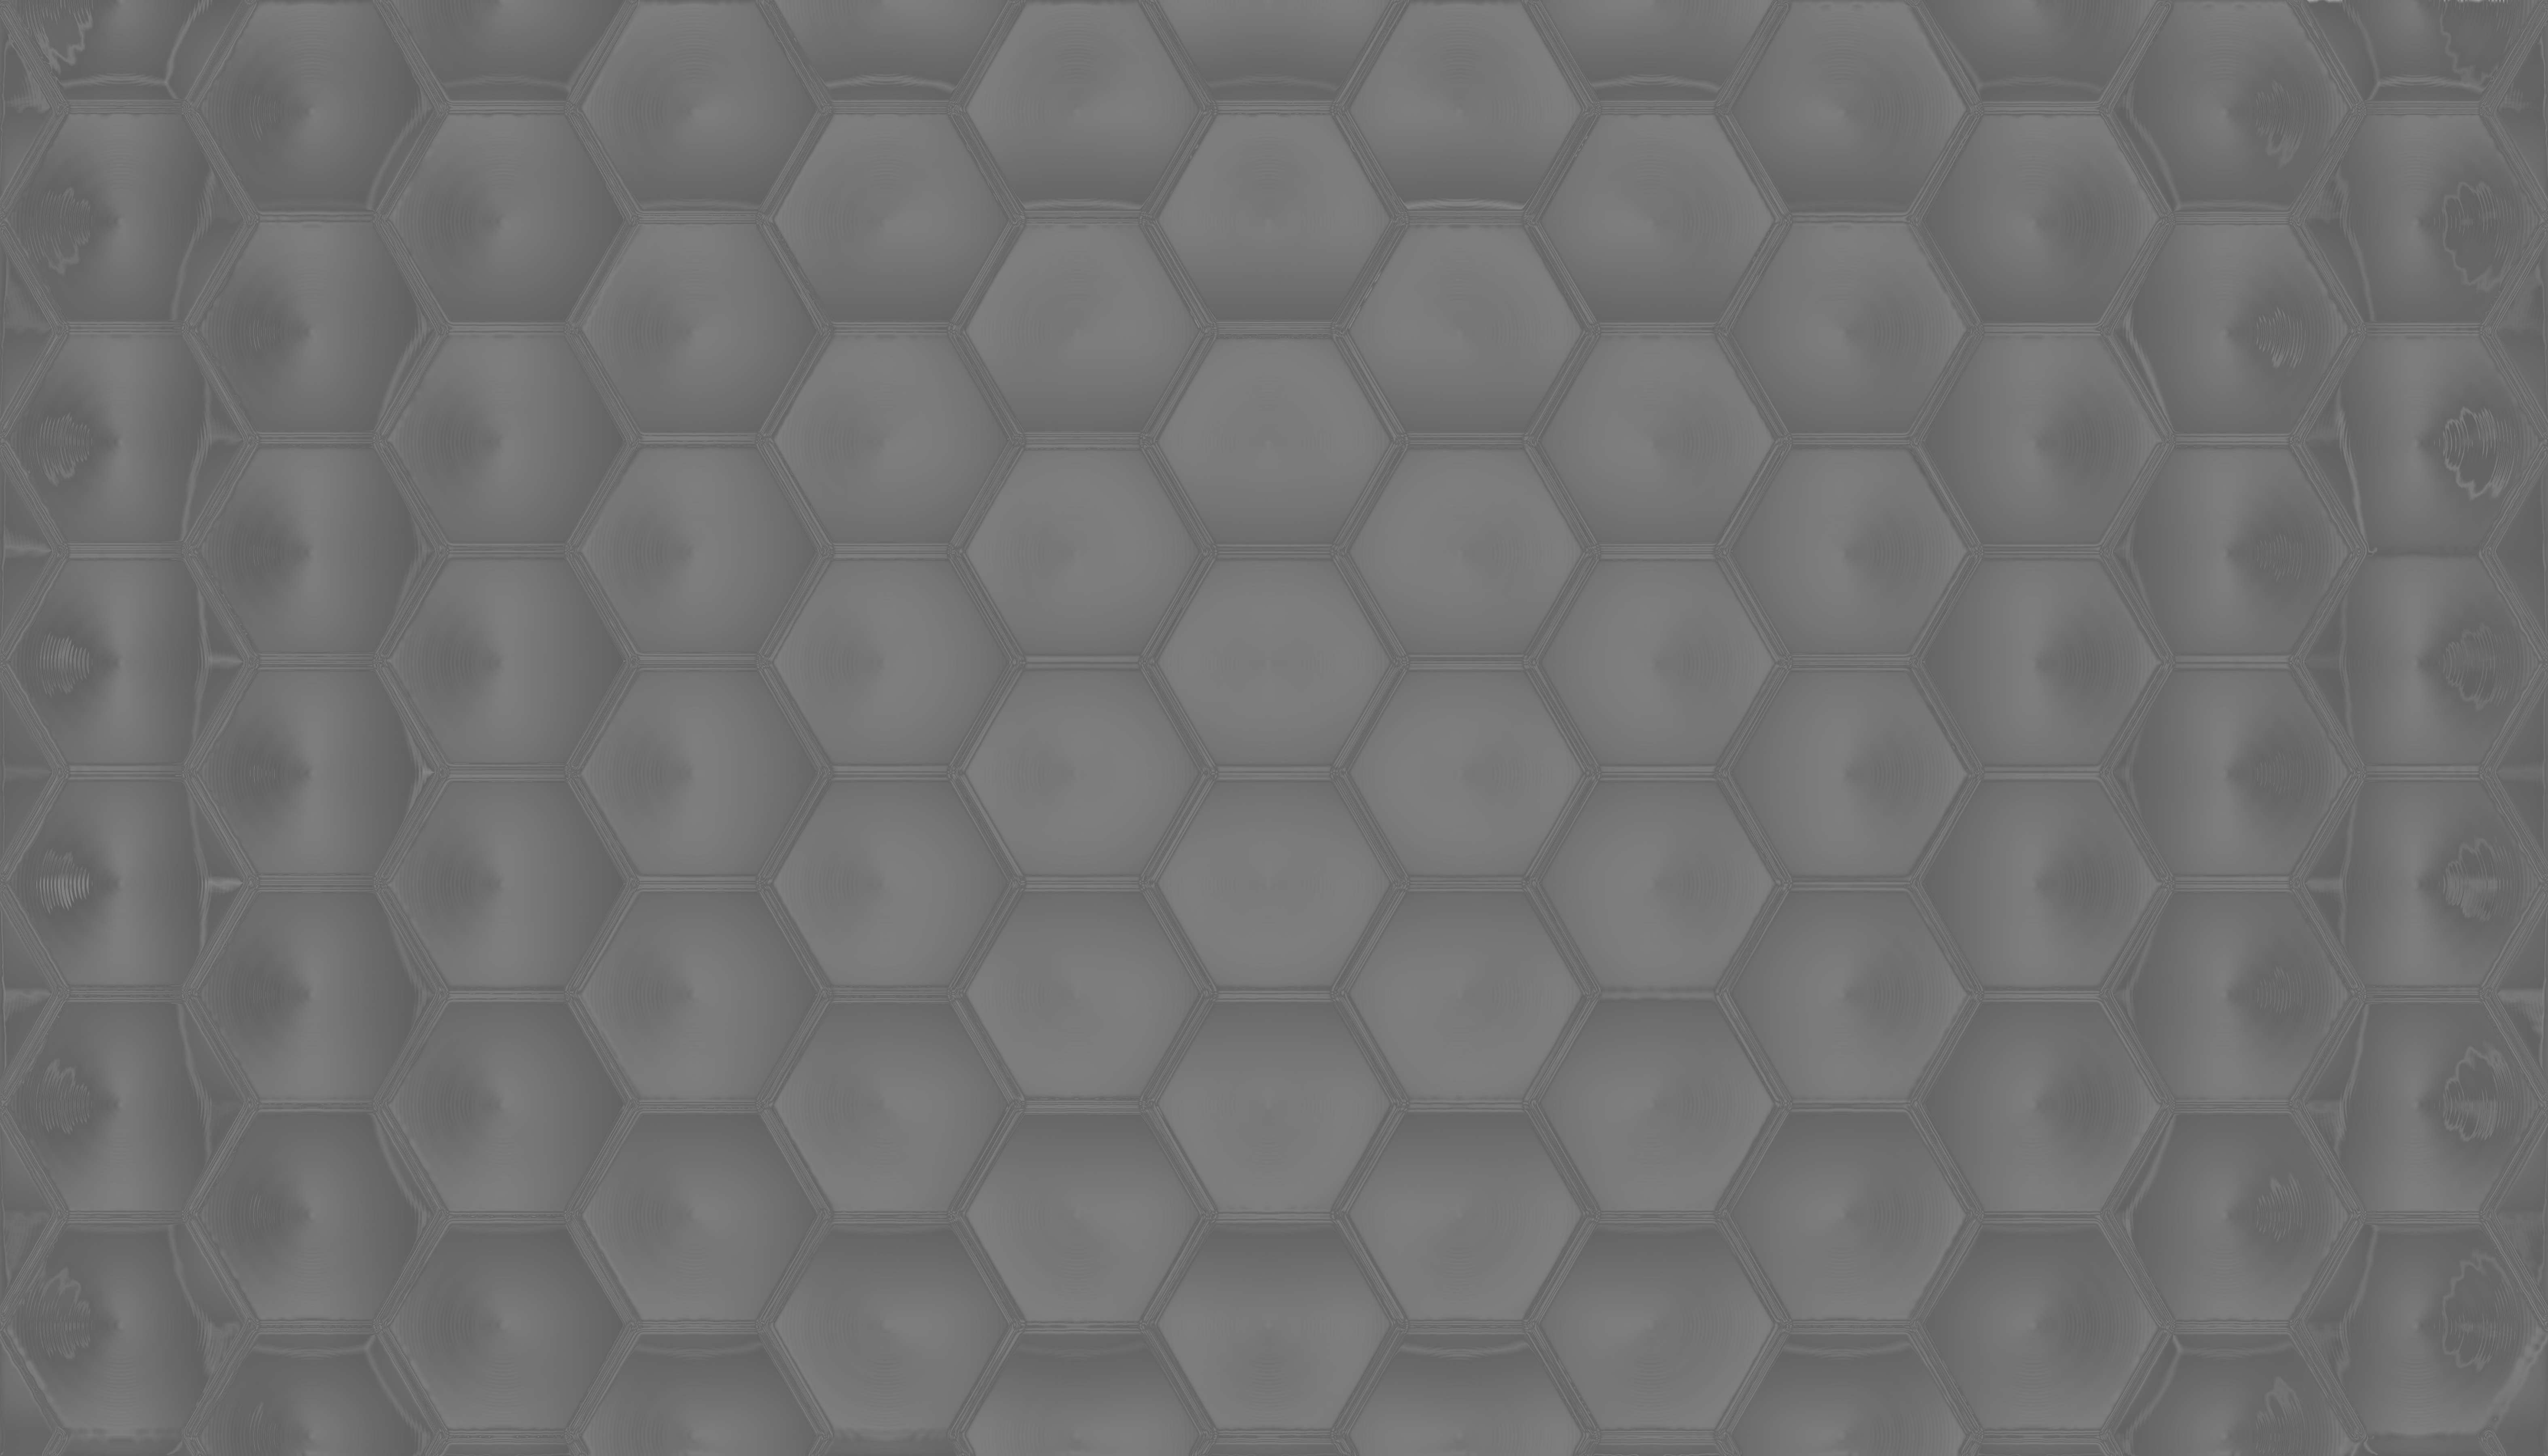 569525 download free Gray wallpapers for computer, 3d, abstract, hexagon Gray pictures and backgrounds for desktop